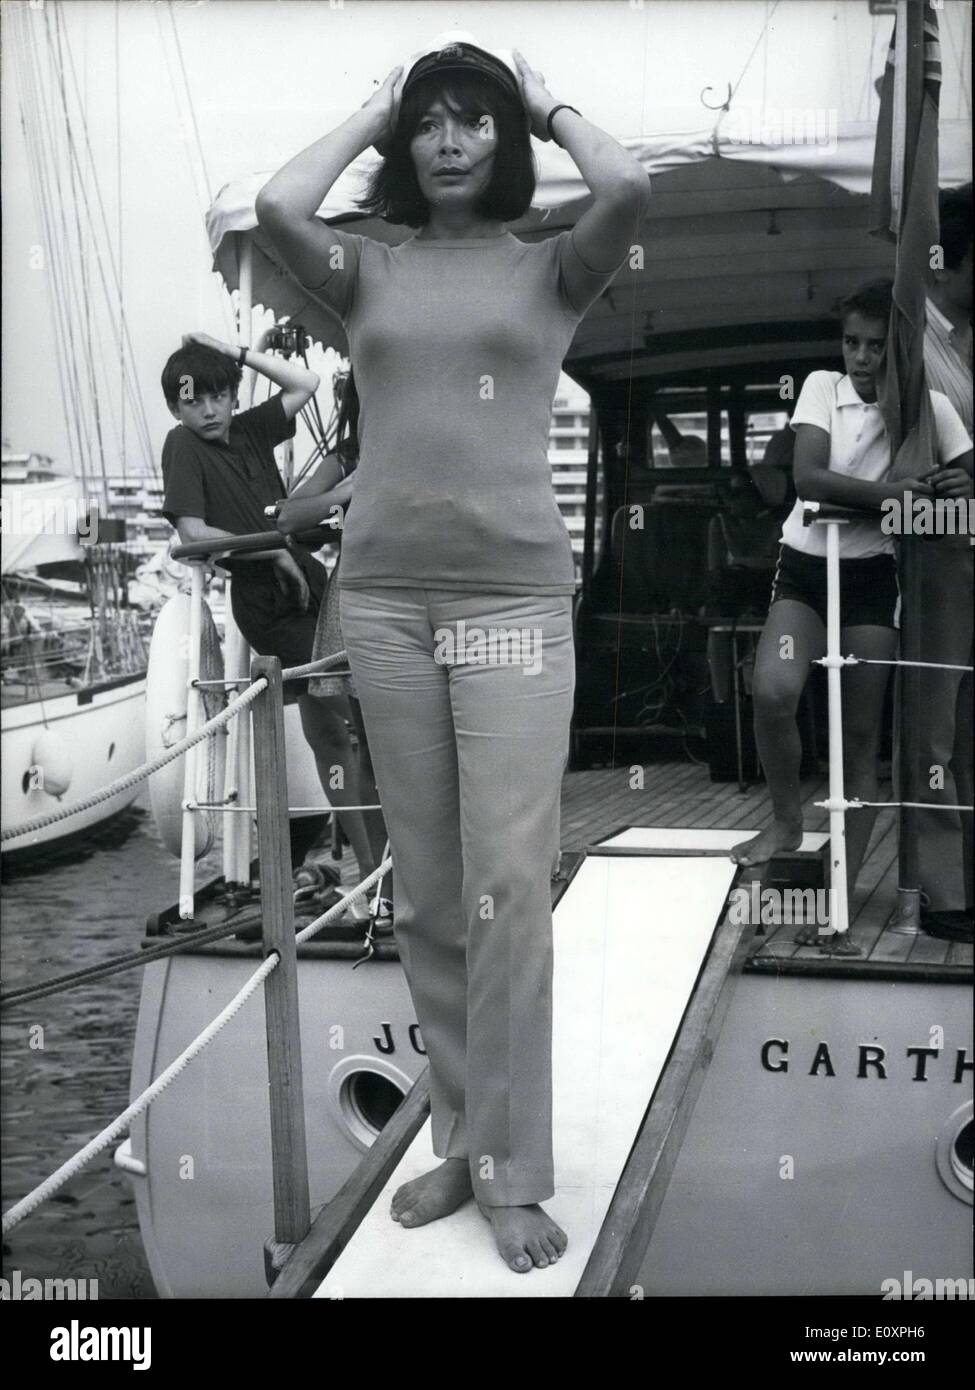 Jul. 28, 1967 - Letting her husband Michel Piccoli be for a little while, Juliette Greco went to spend a short vacation in Cannes to relax and breathe some fresh air. Picture: Hat on her head, Mrs. Juliette Piccoli, plays captain. Stock Photo